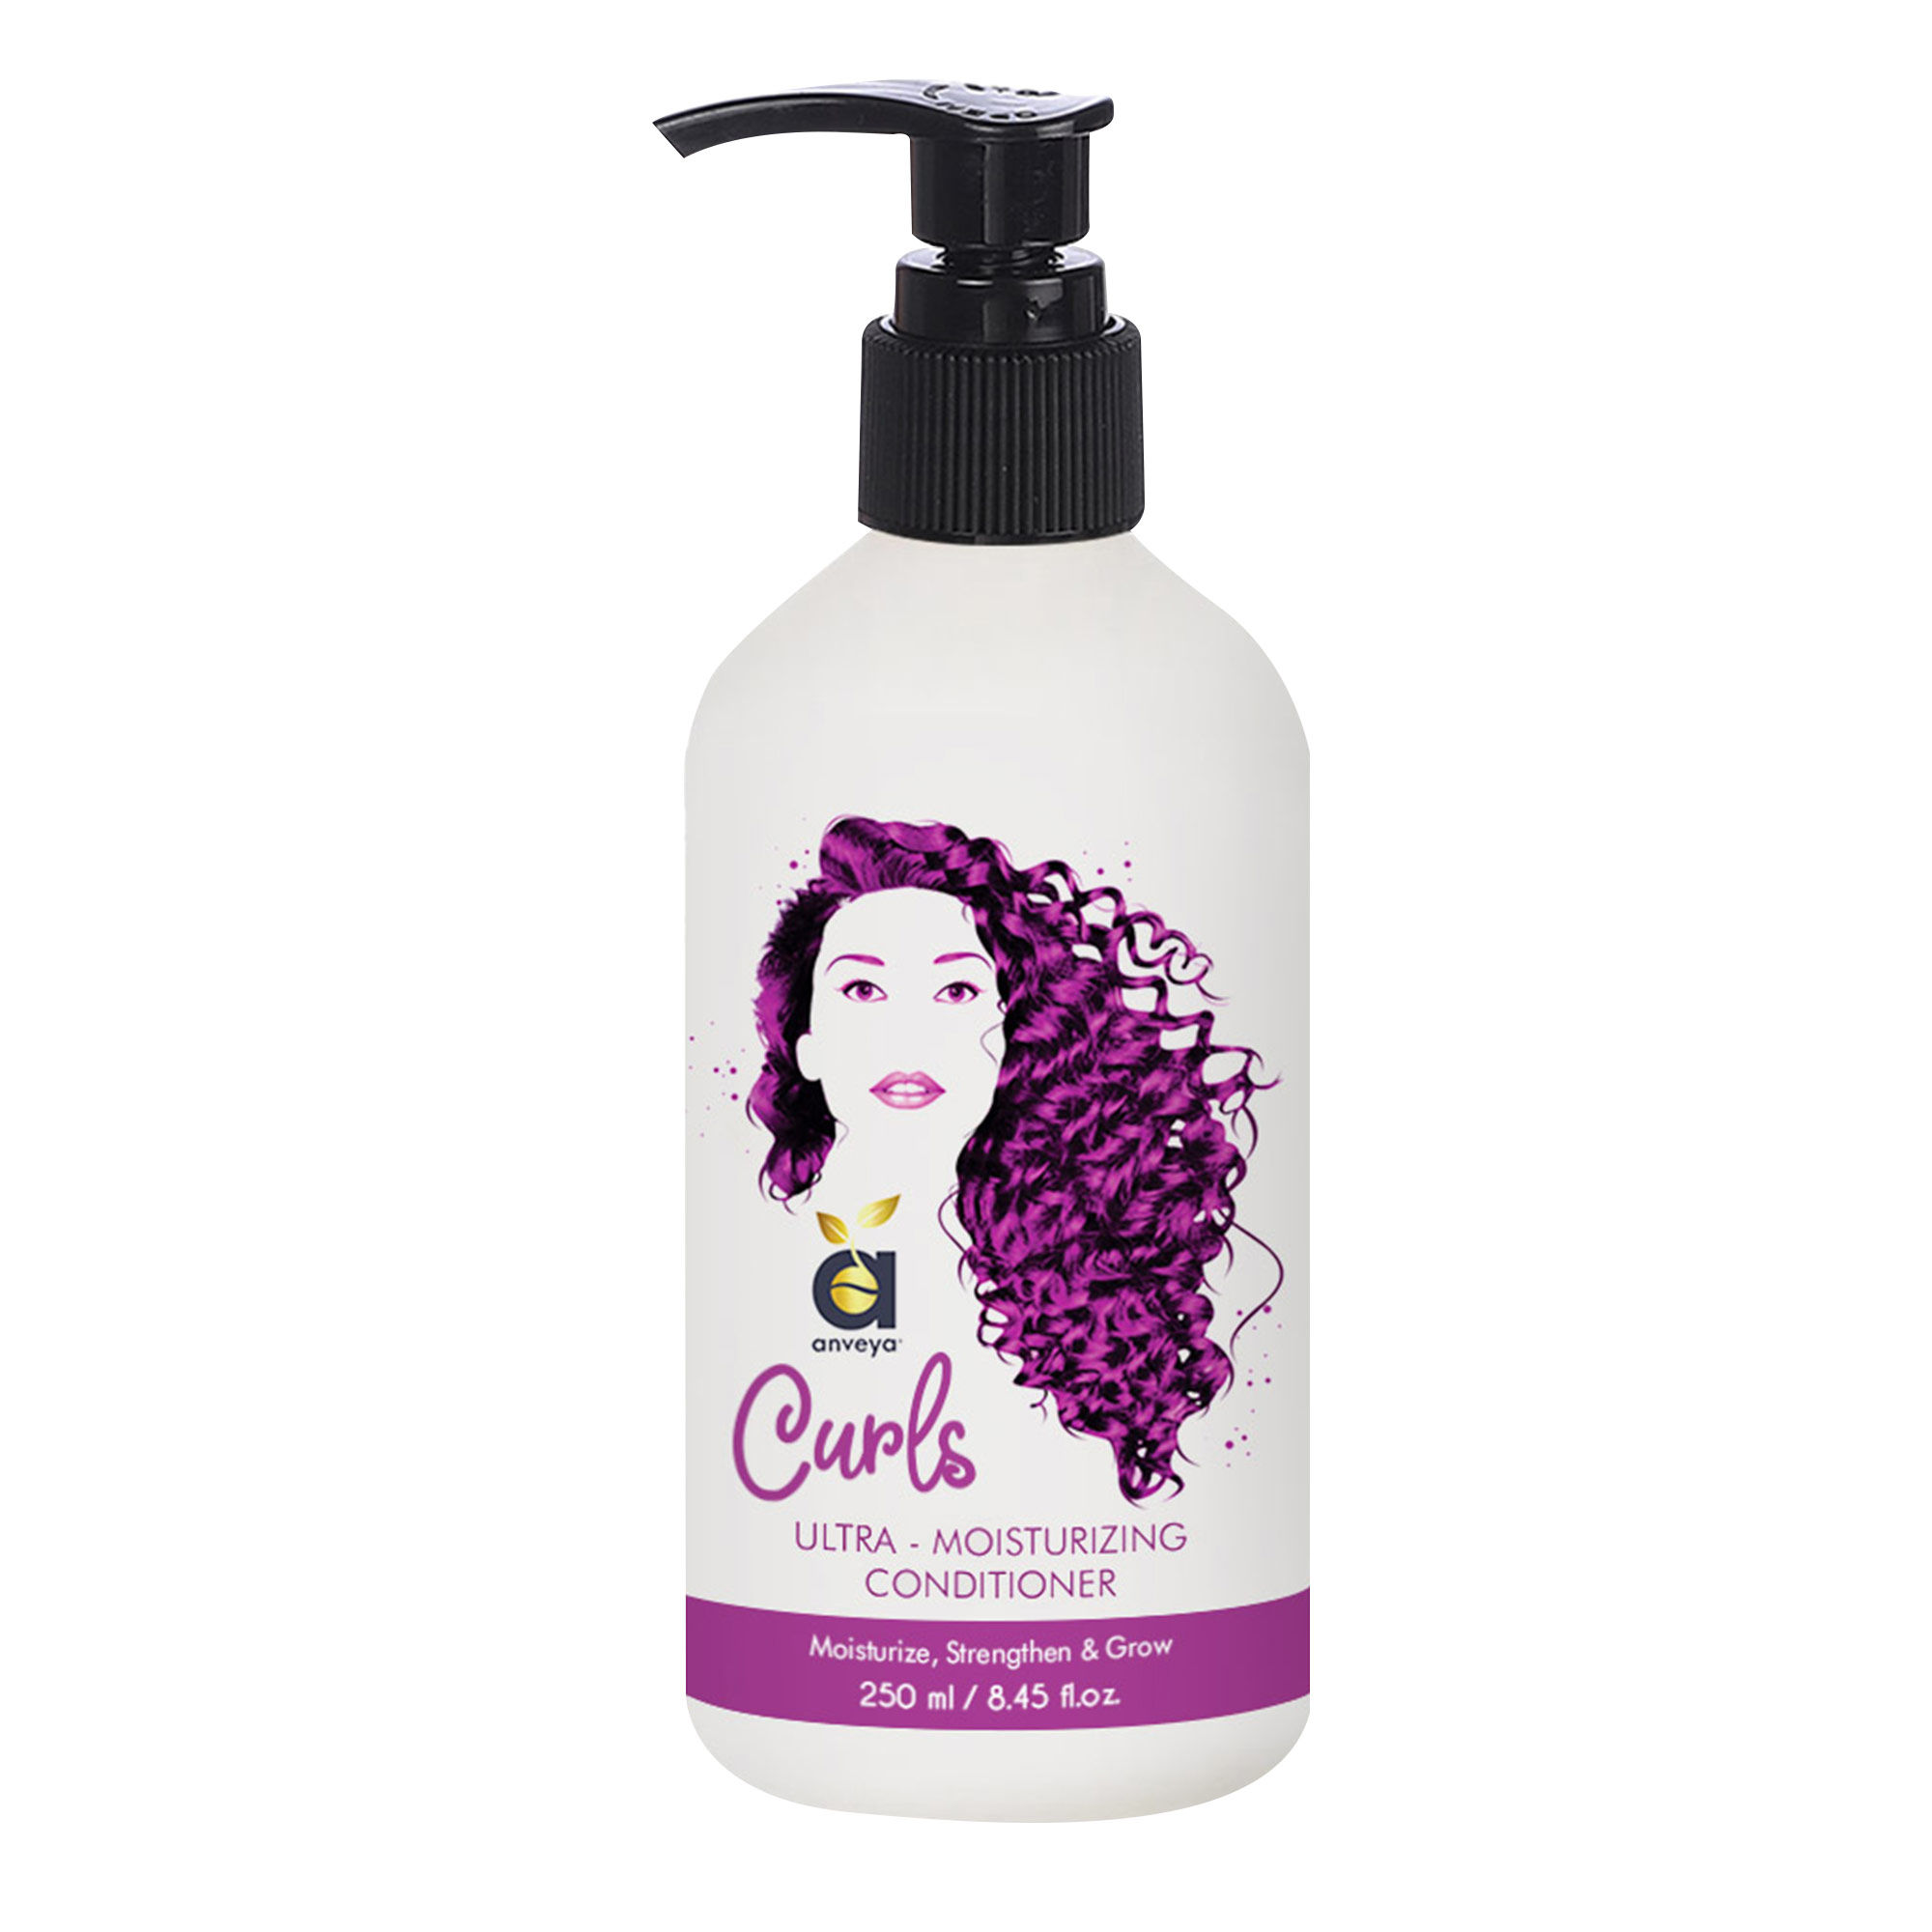 Buy Fix My Curls Hydrating Deep Conditioner  Curly And Wavy Hair   Enriched with mango  shea butter  Moisturize Detangle  Frizz control   Cruelty Free Paraben  Silicone Free 